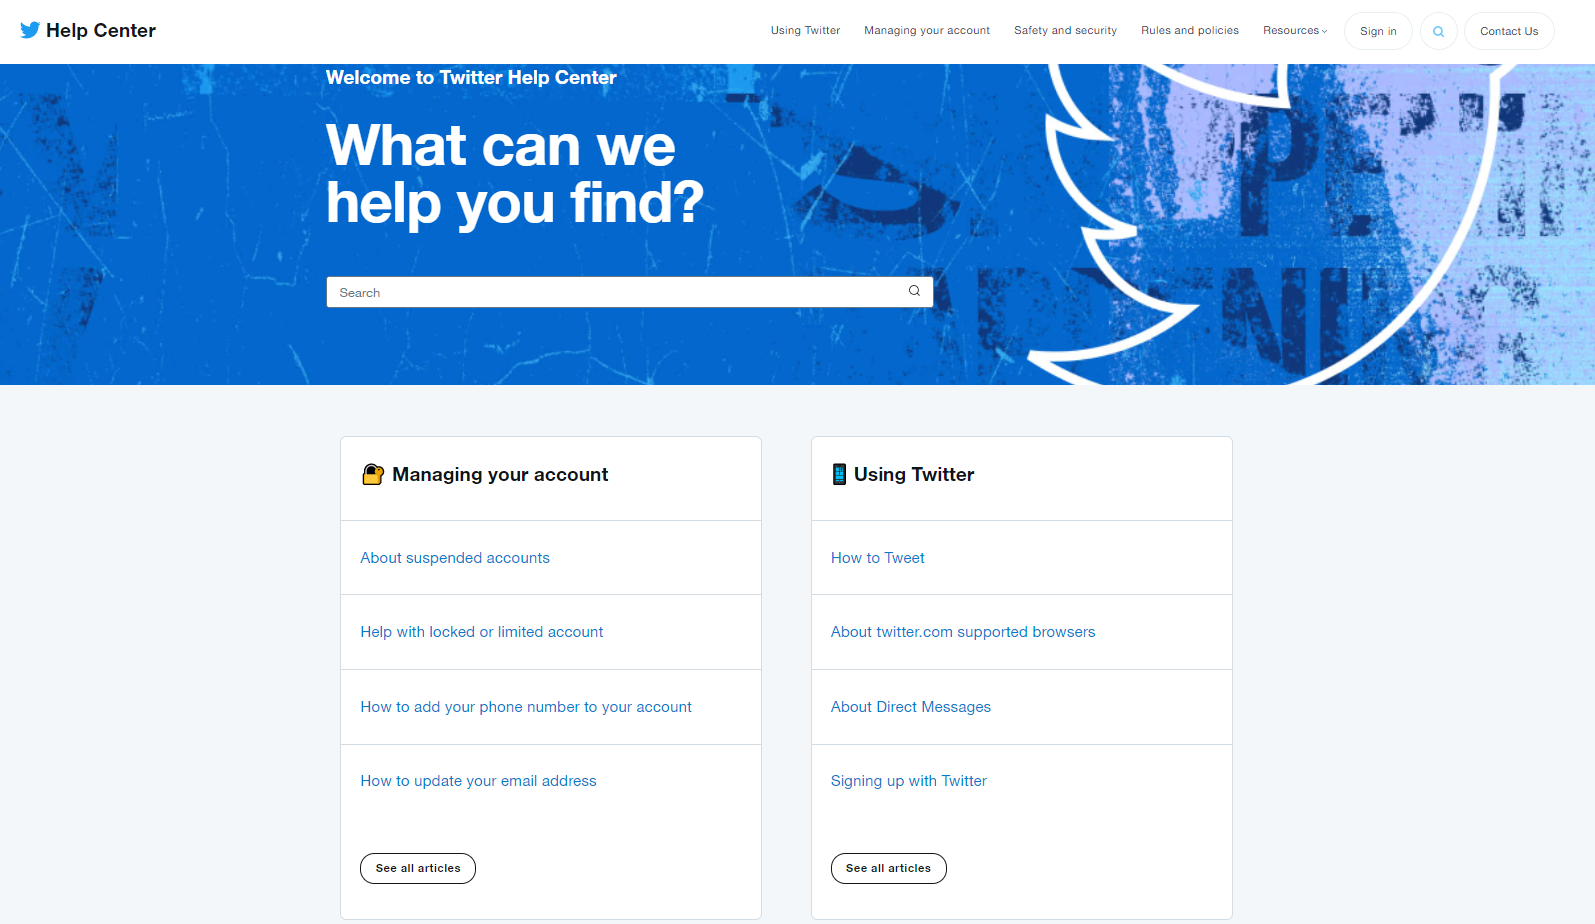 The Twitter Help Center is a very clean and structured FAQ page